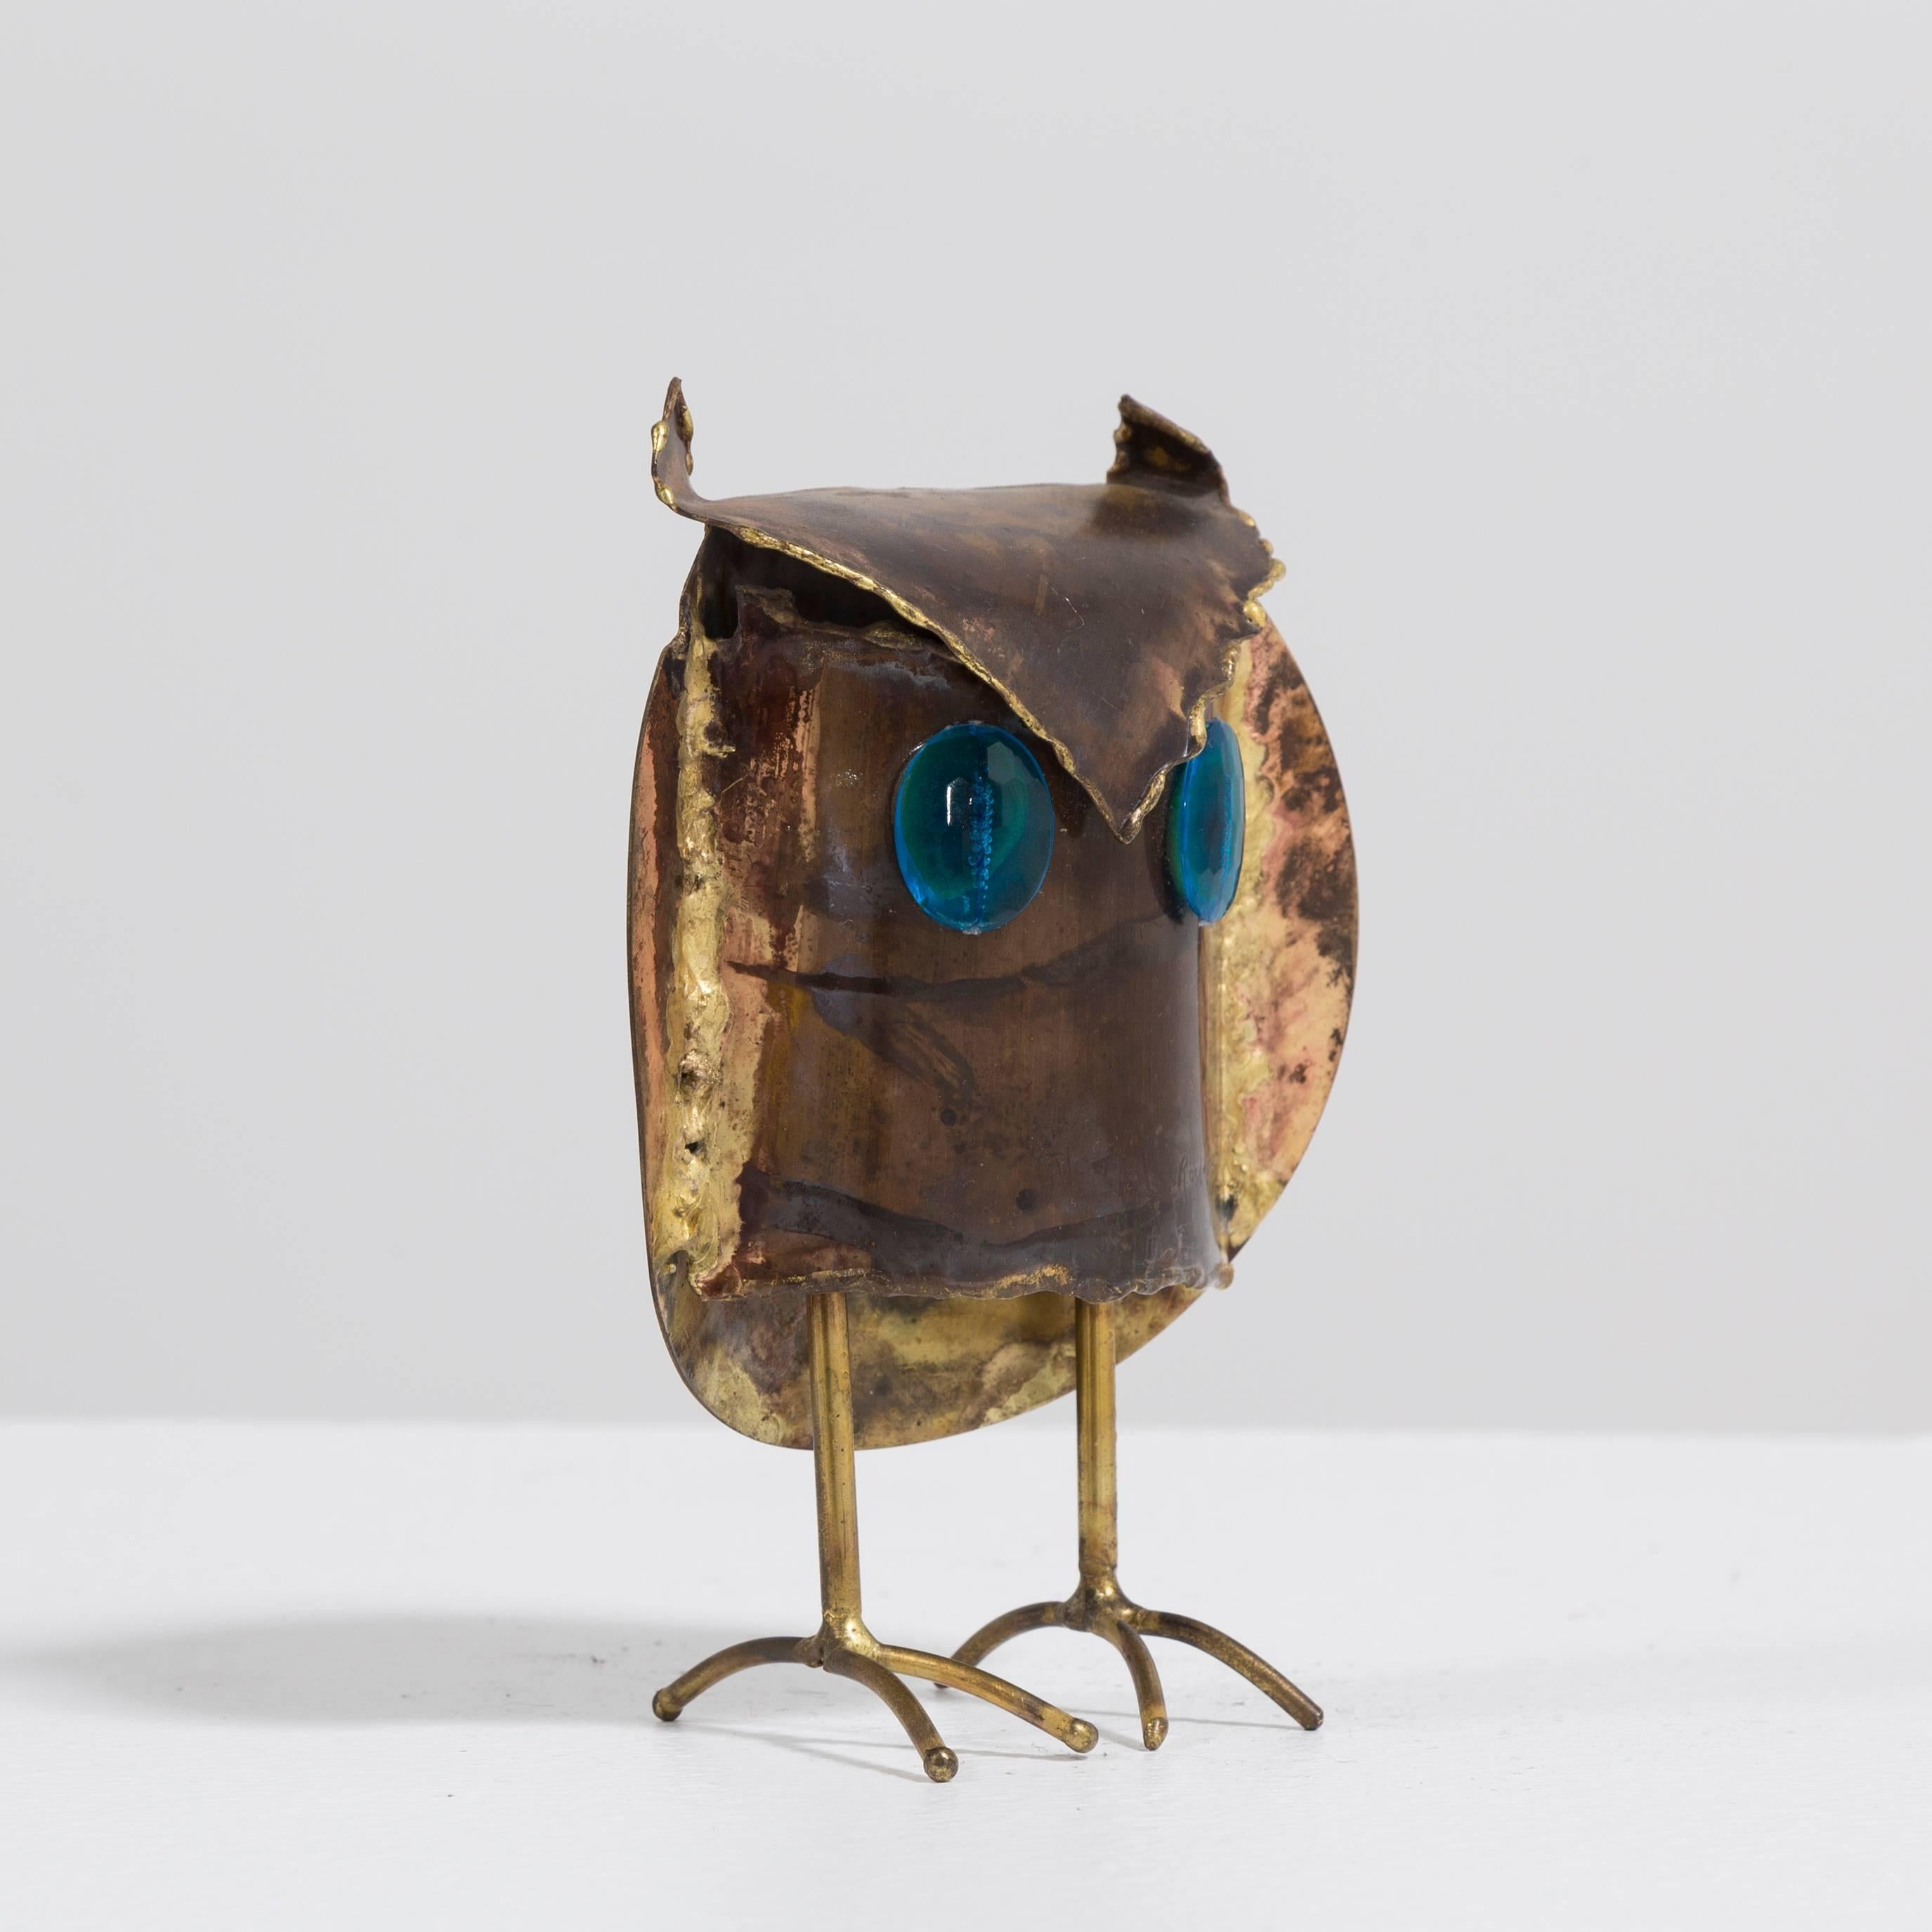 A small Brutalist owl sculpture with blue eyes, signed and dated Rodriguez 73'.